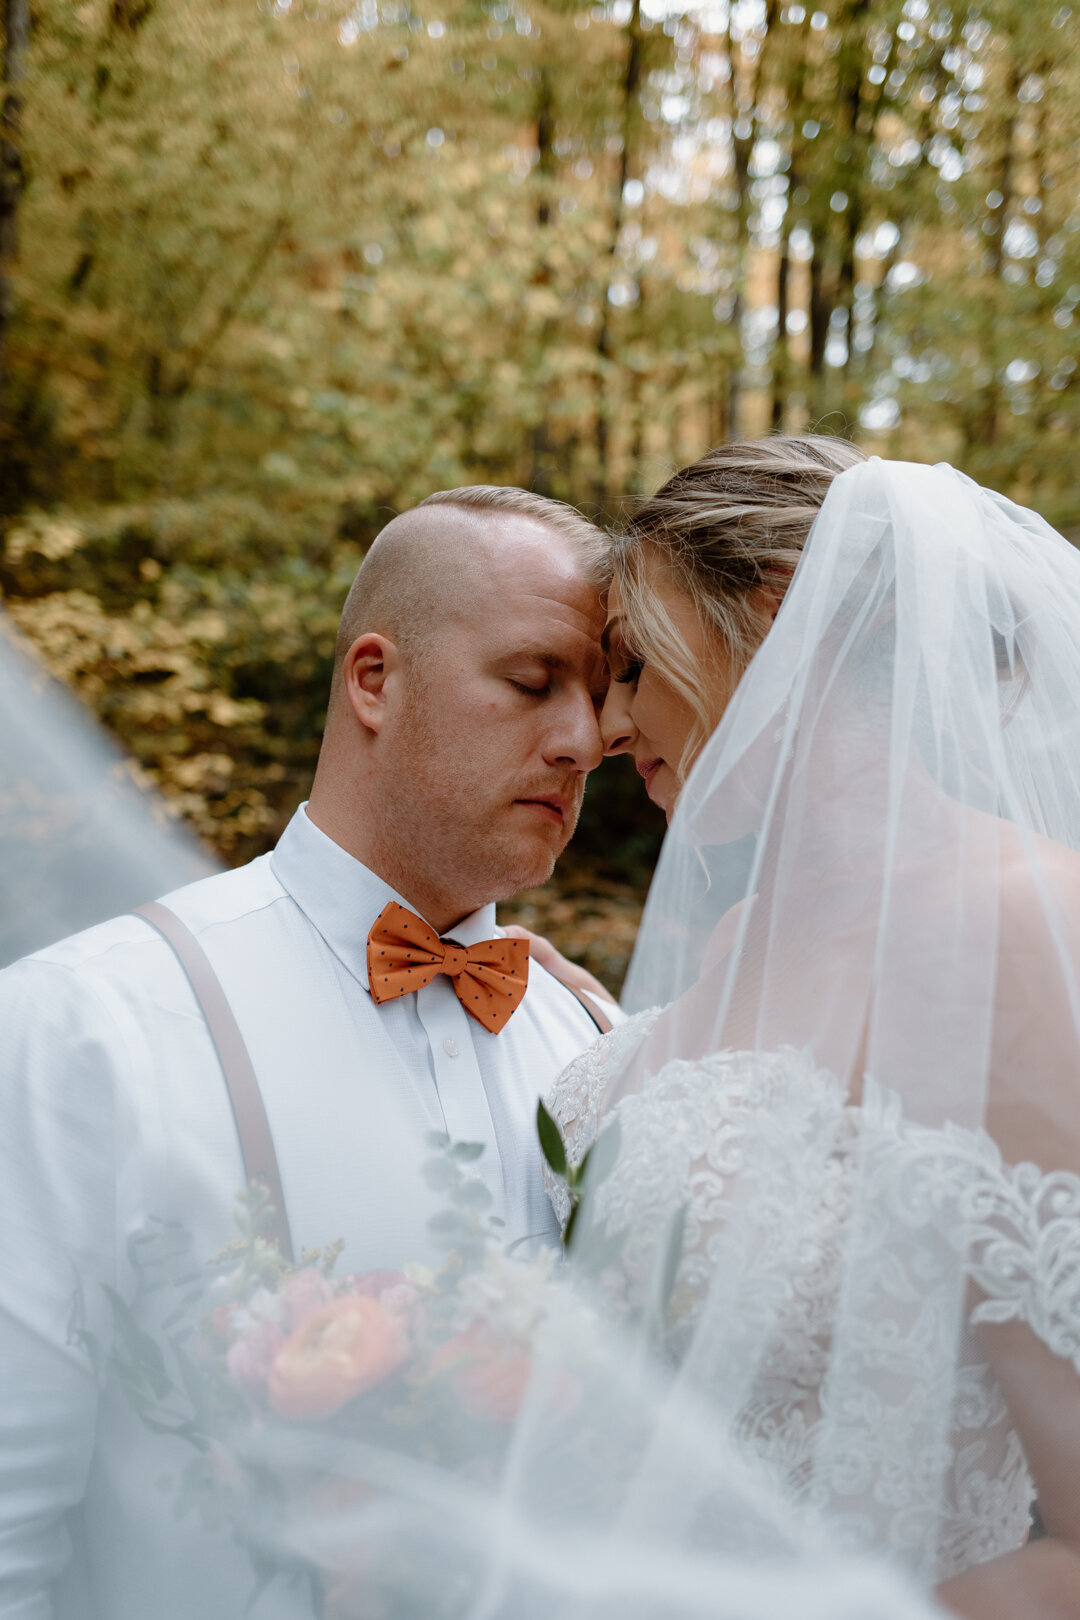 Intimate bride and groom portrait at their summer elopement in Tennessee.